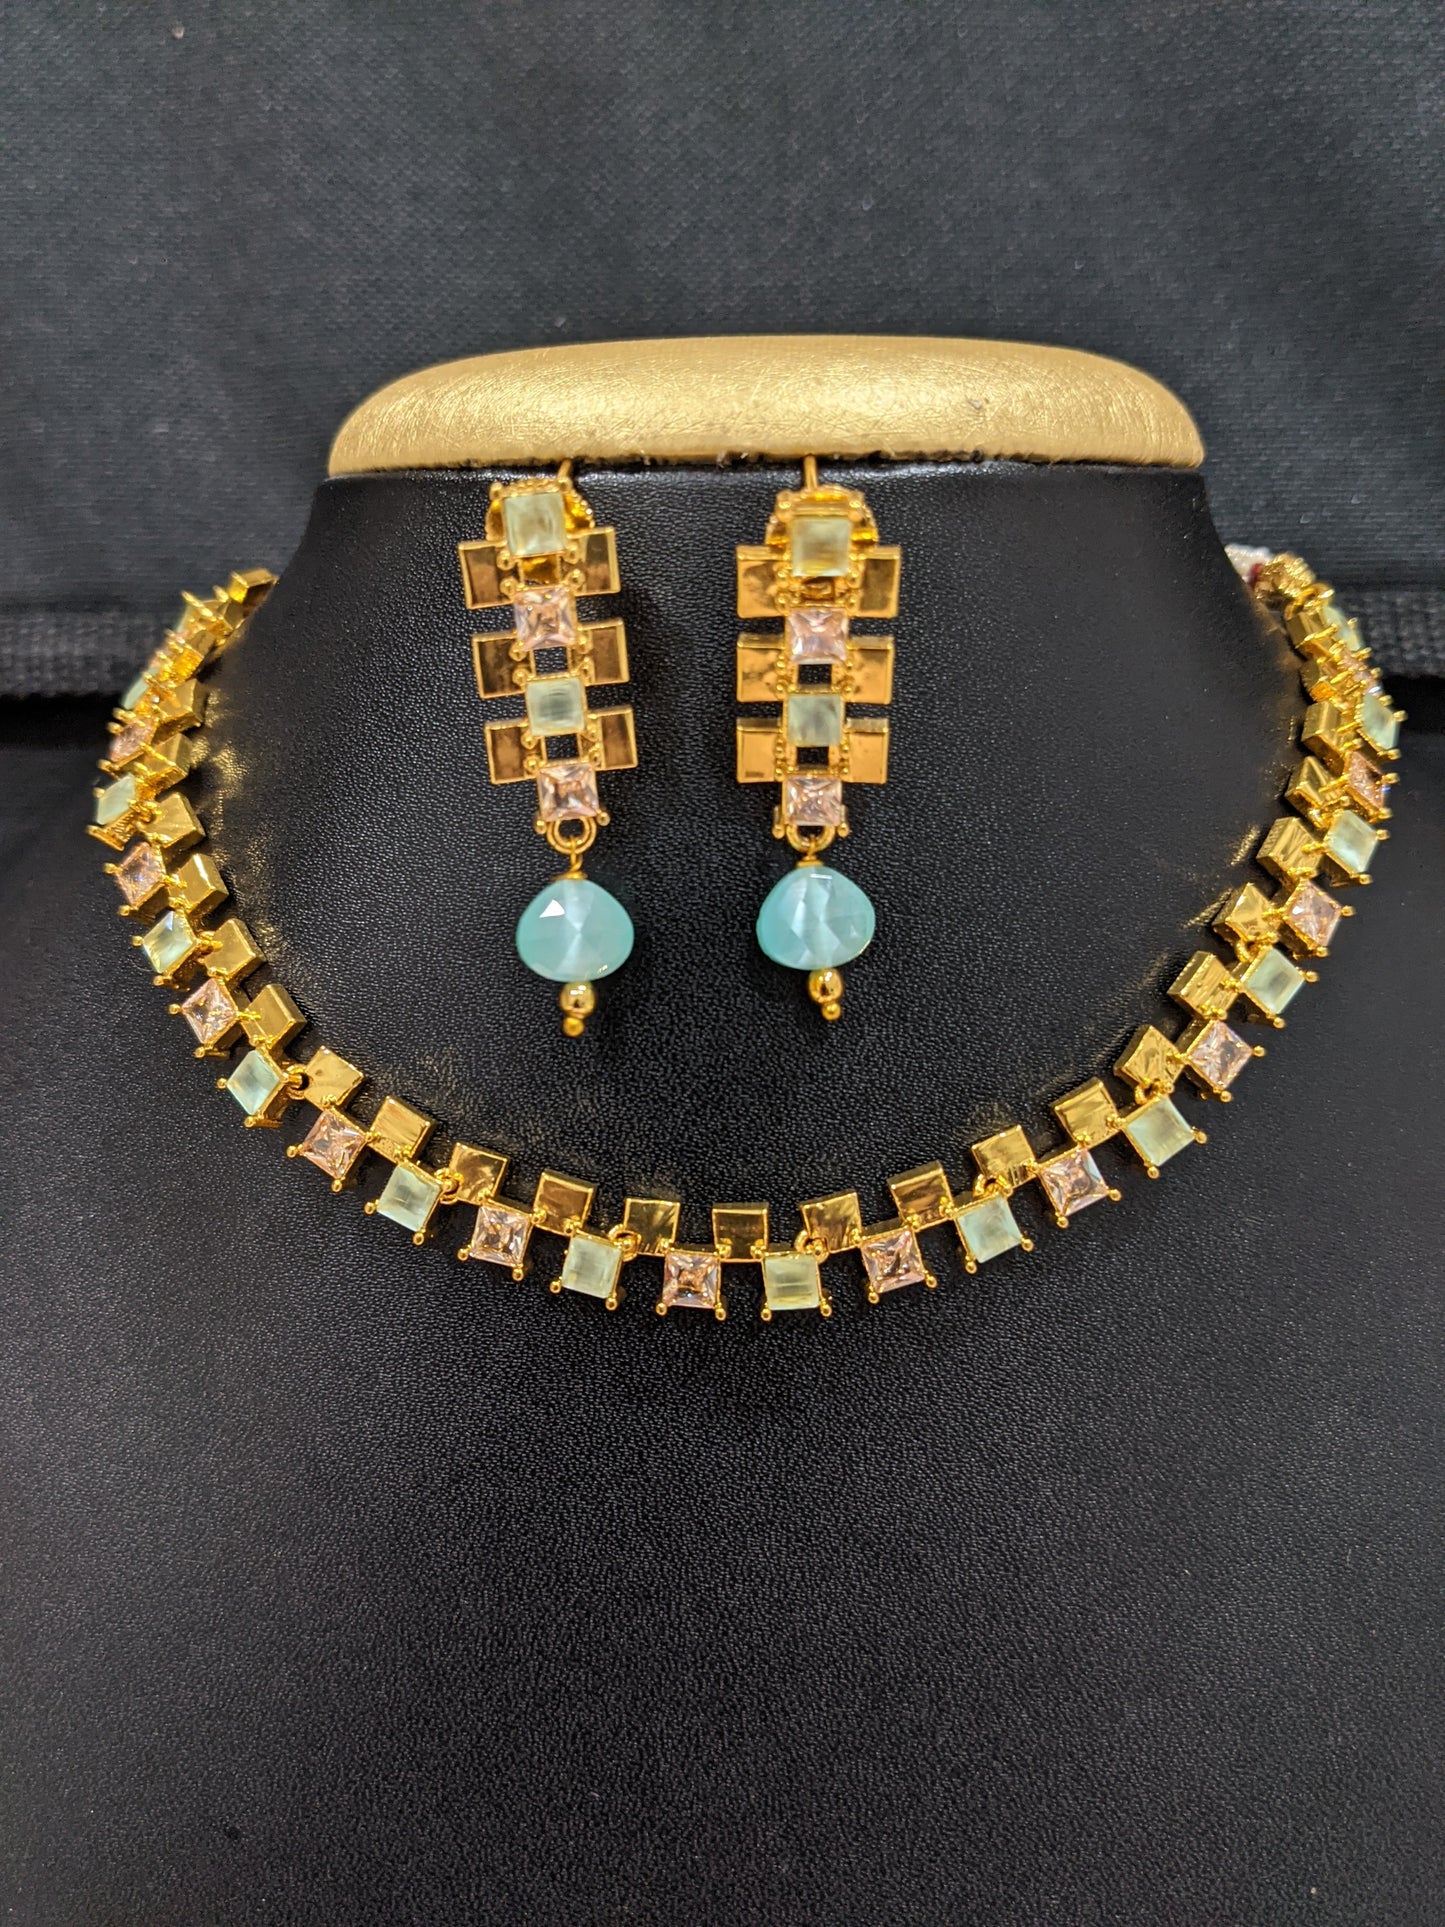 Mint Green Polki stone Choker Necklace and Earrings set